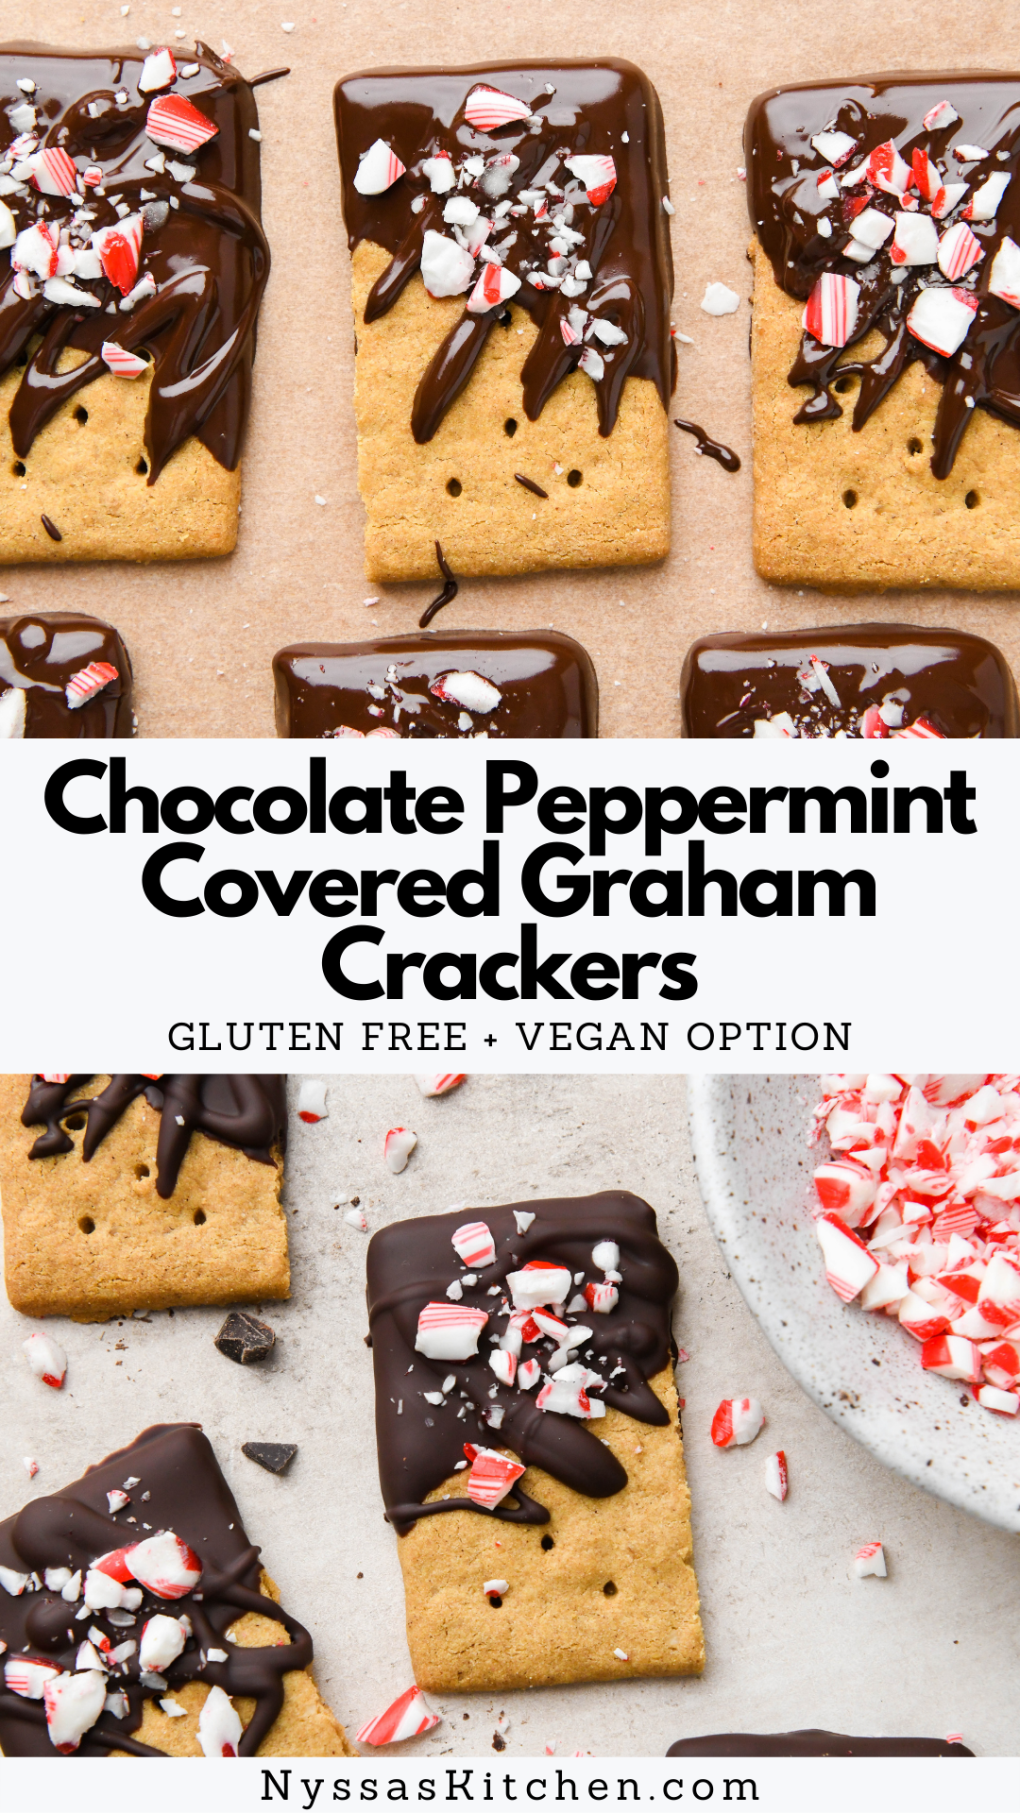 Pinterest pin for chocolate peppermint covered graham crackers.